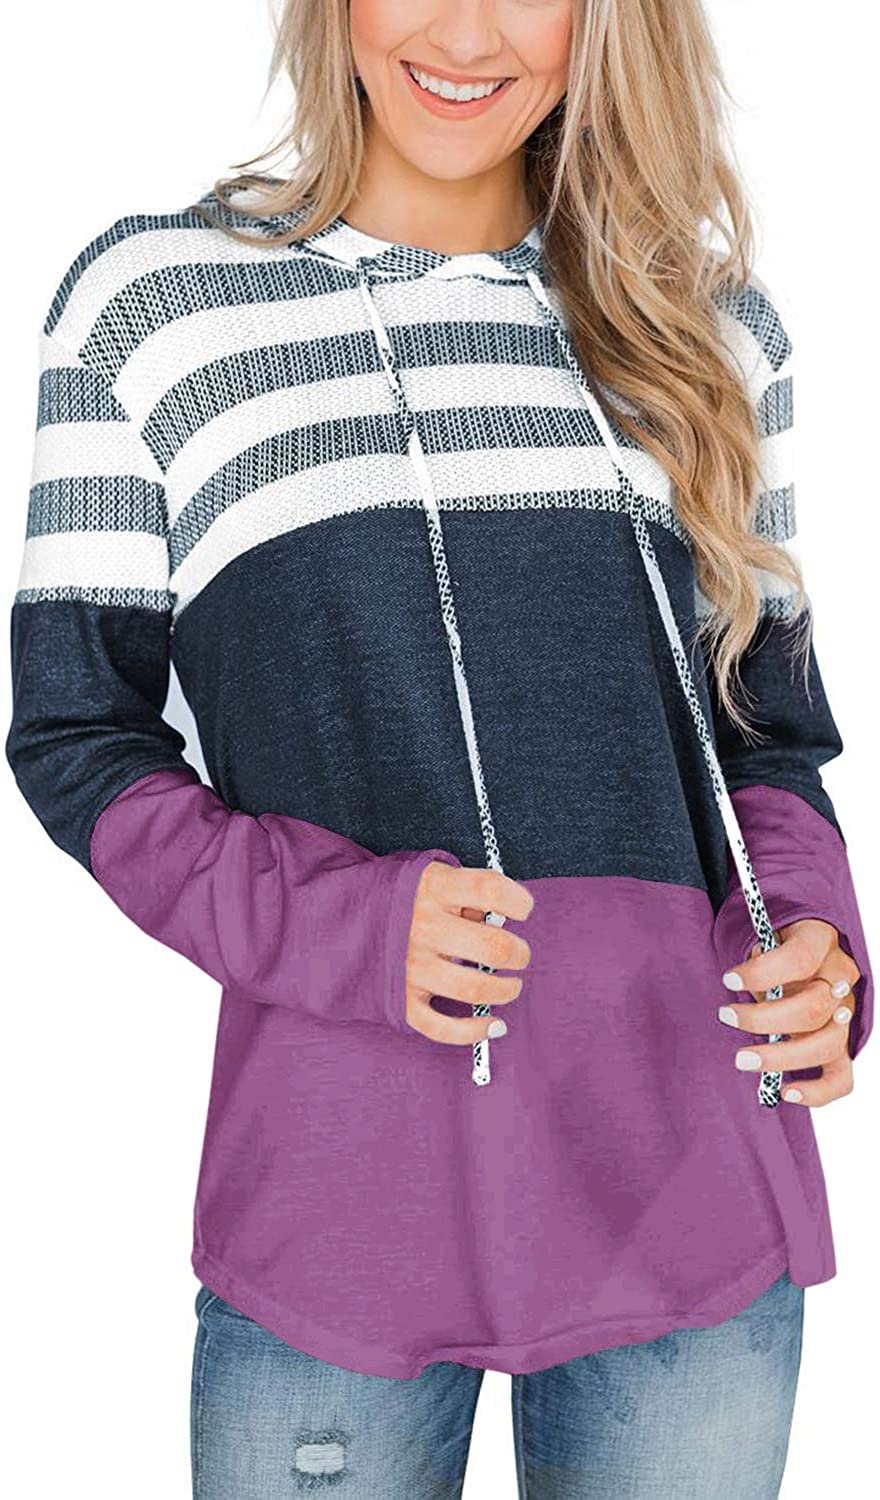 SMENG Womens Striped Color Block Long Sleeve Pullover Hoodies Sweatshirts Drawstring Tops